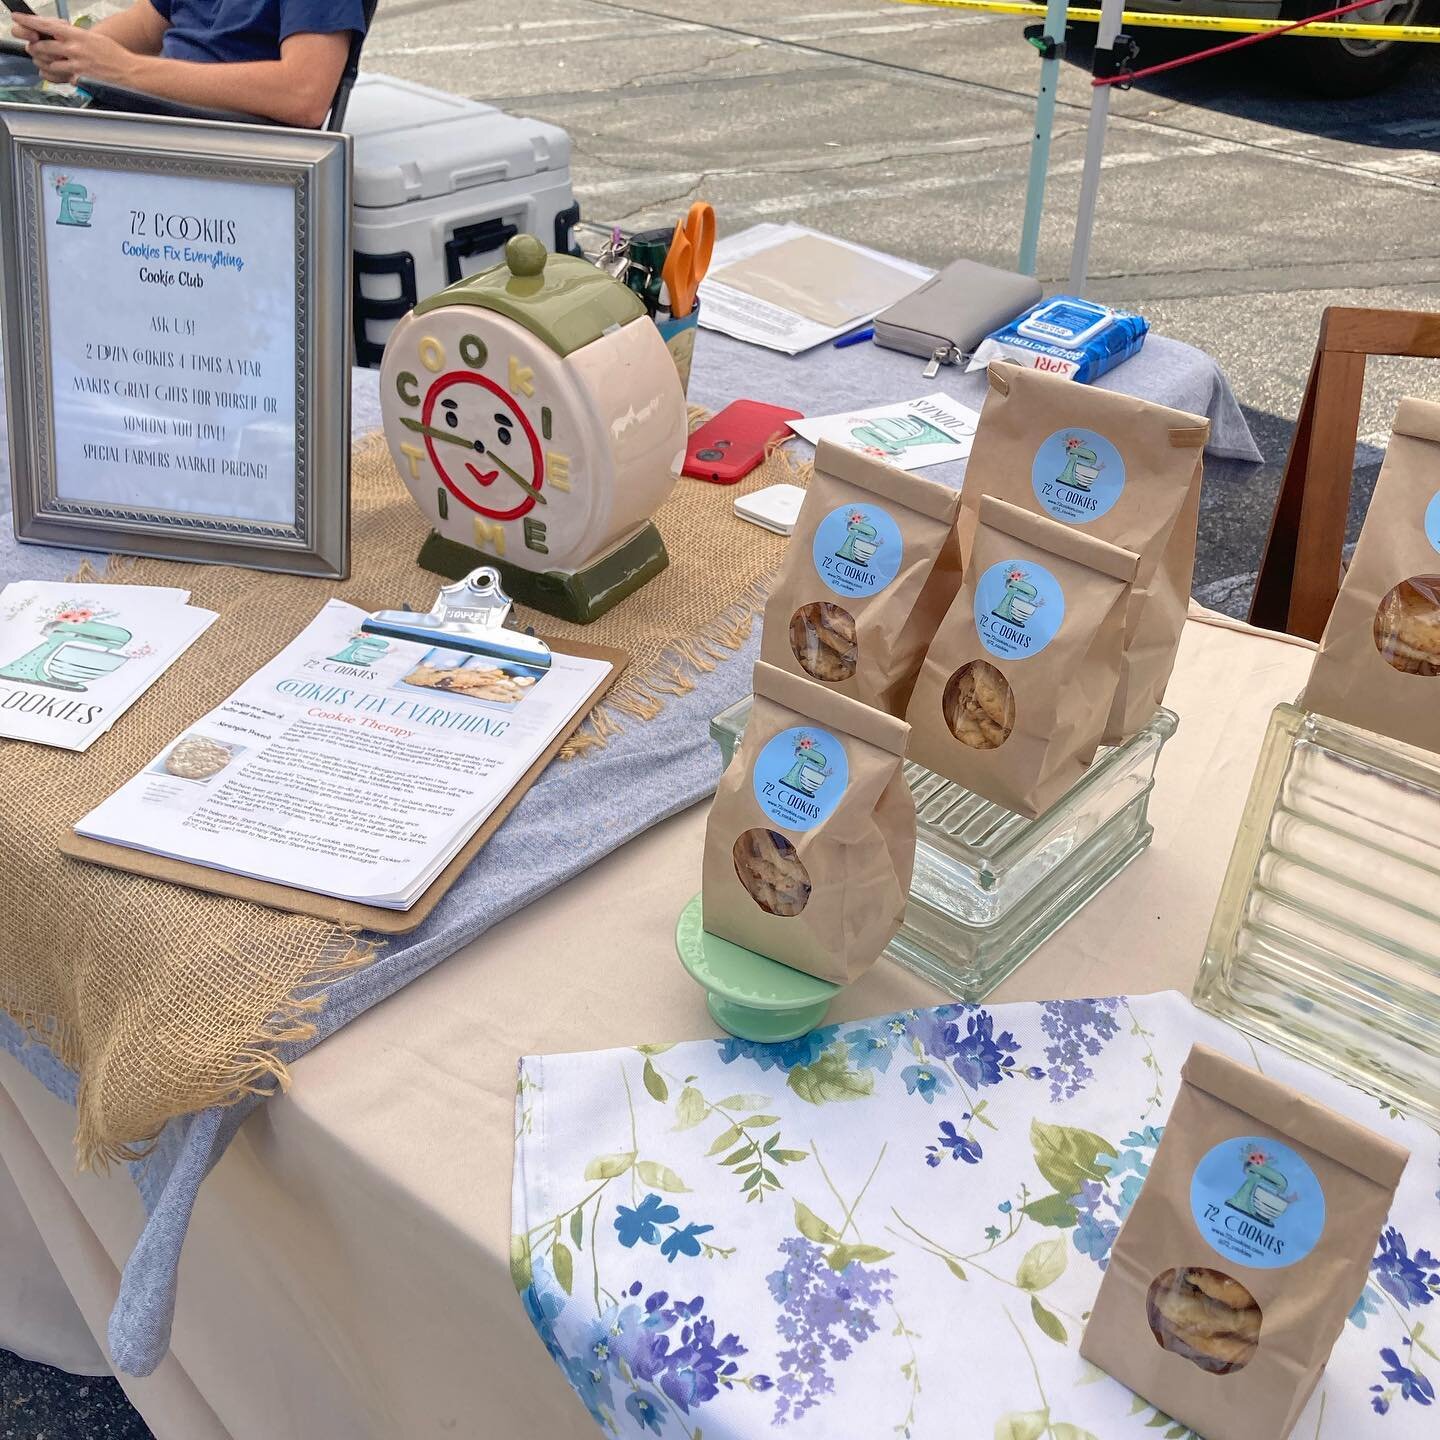 Butter, sugar, magic, and love! We&rsquo;re here at Sherman Oaks Farmers market till 7 pm. #cookies #farmersmarket #women #smallbusiness #friends #cookietime